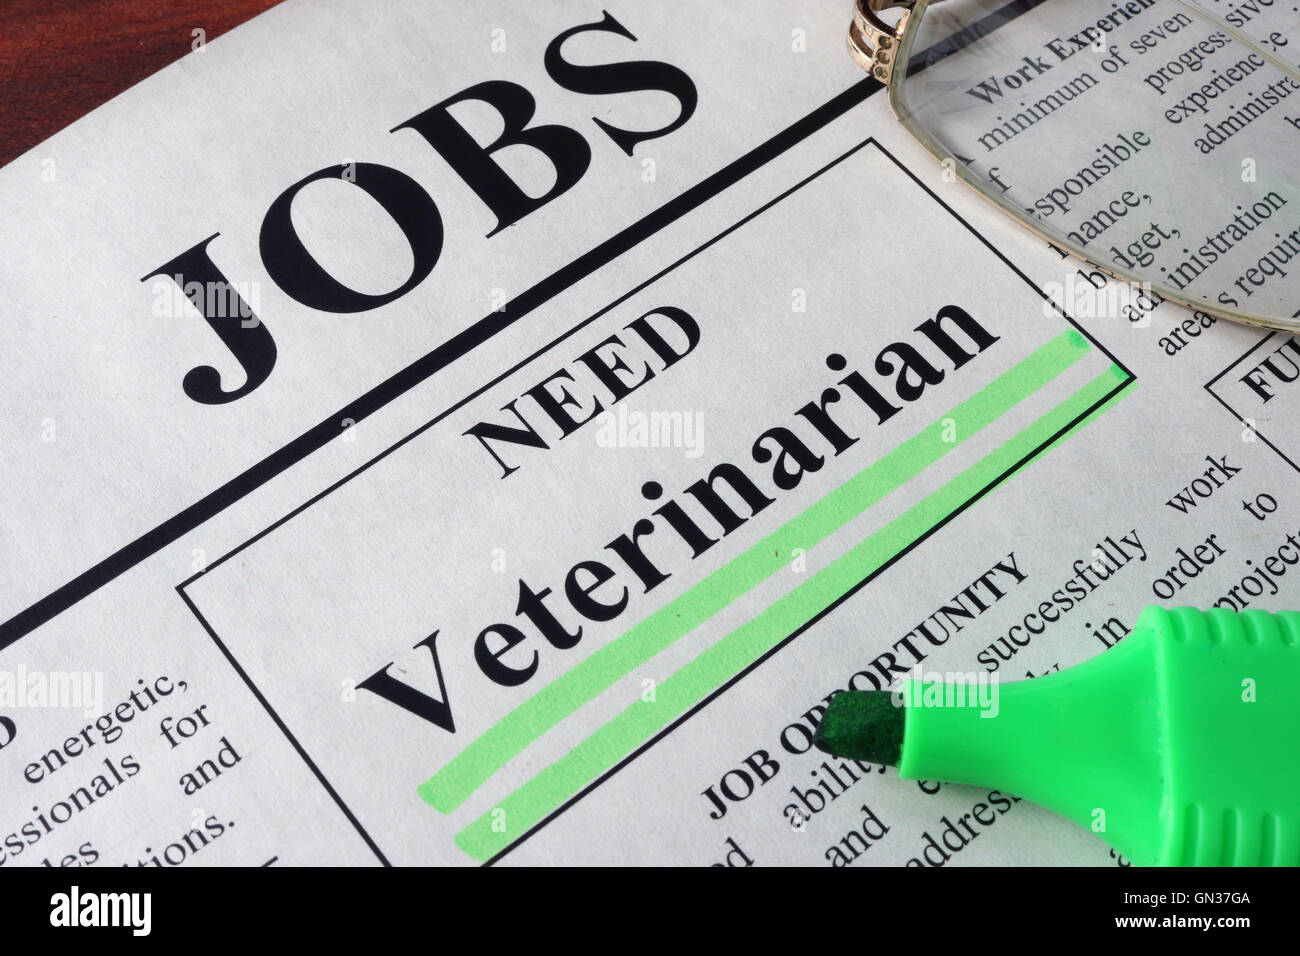 Newspaper with ads for vacancy Veterinarian. Employment concept. Stock Photo